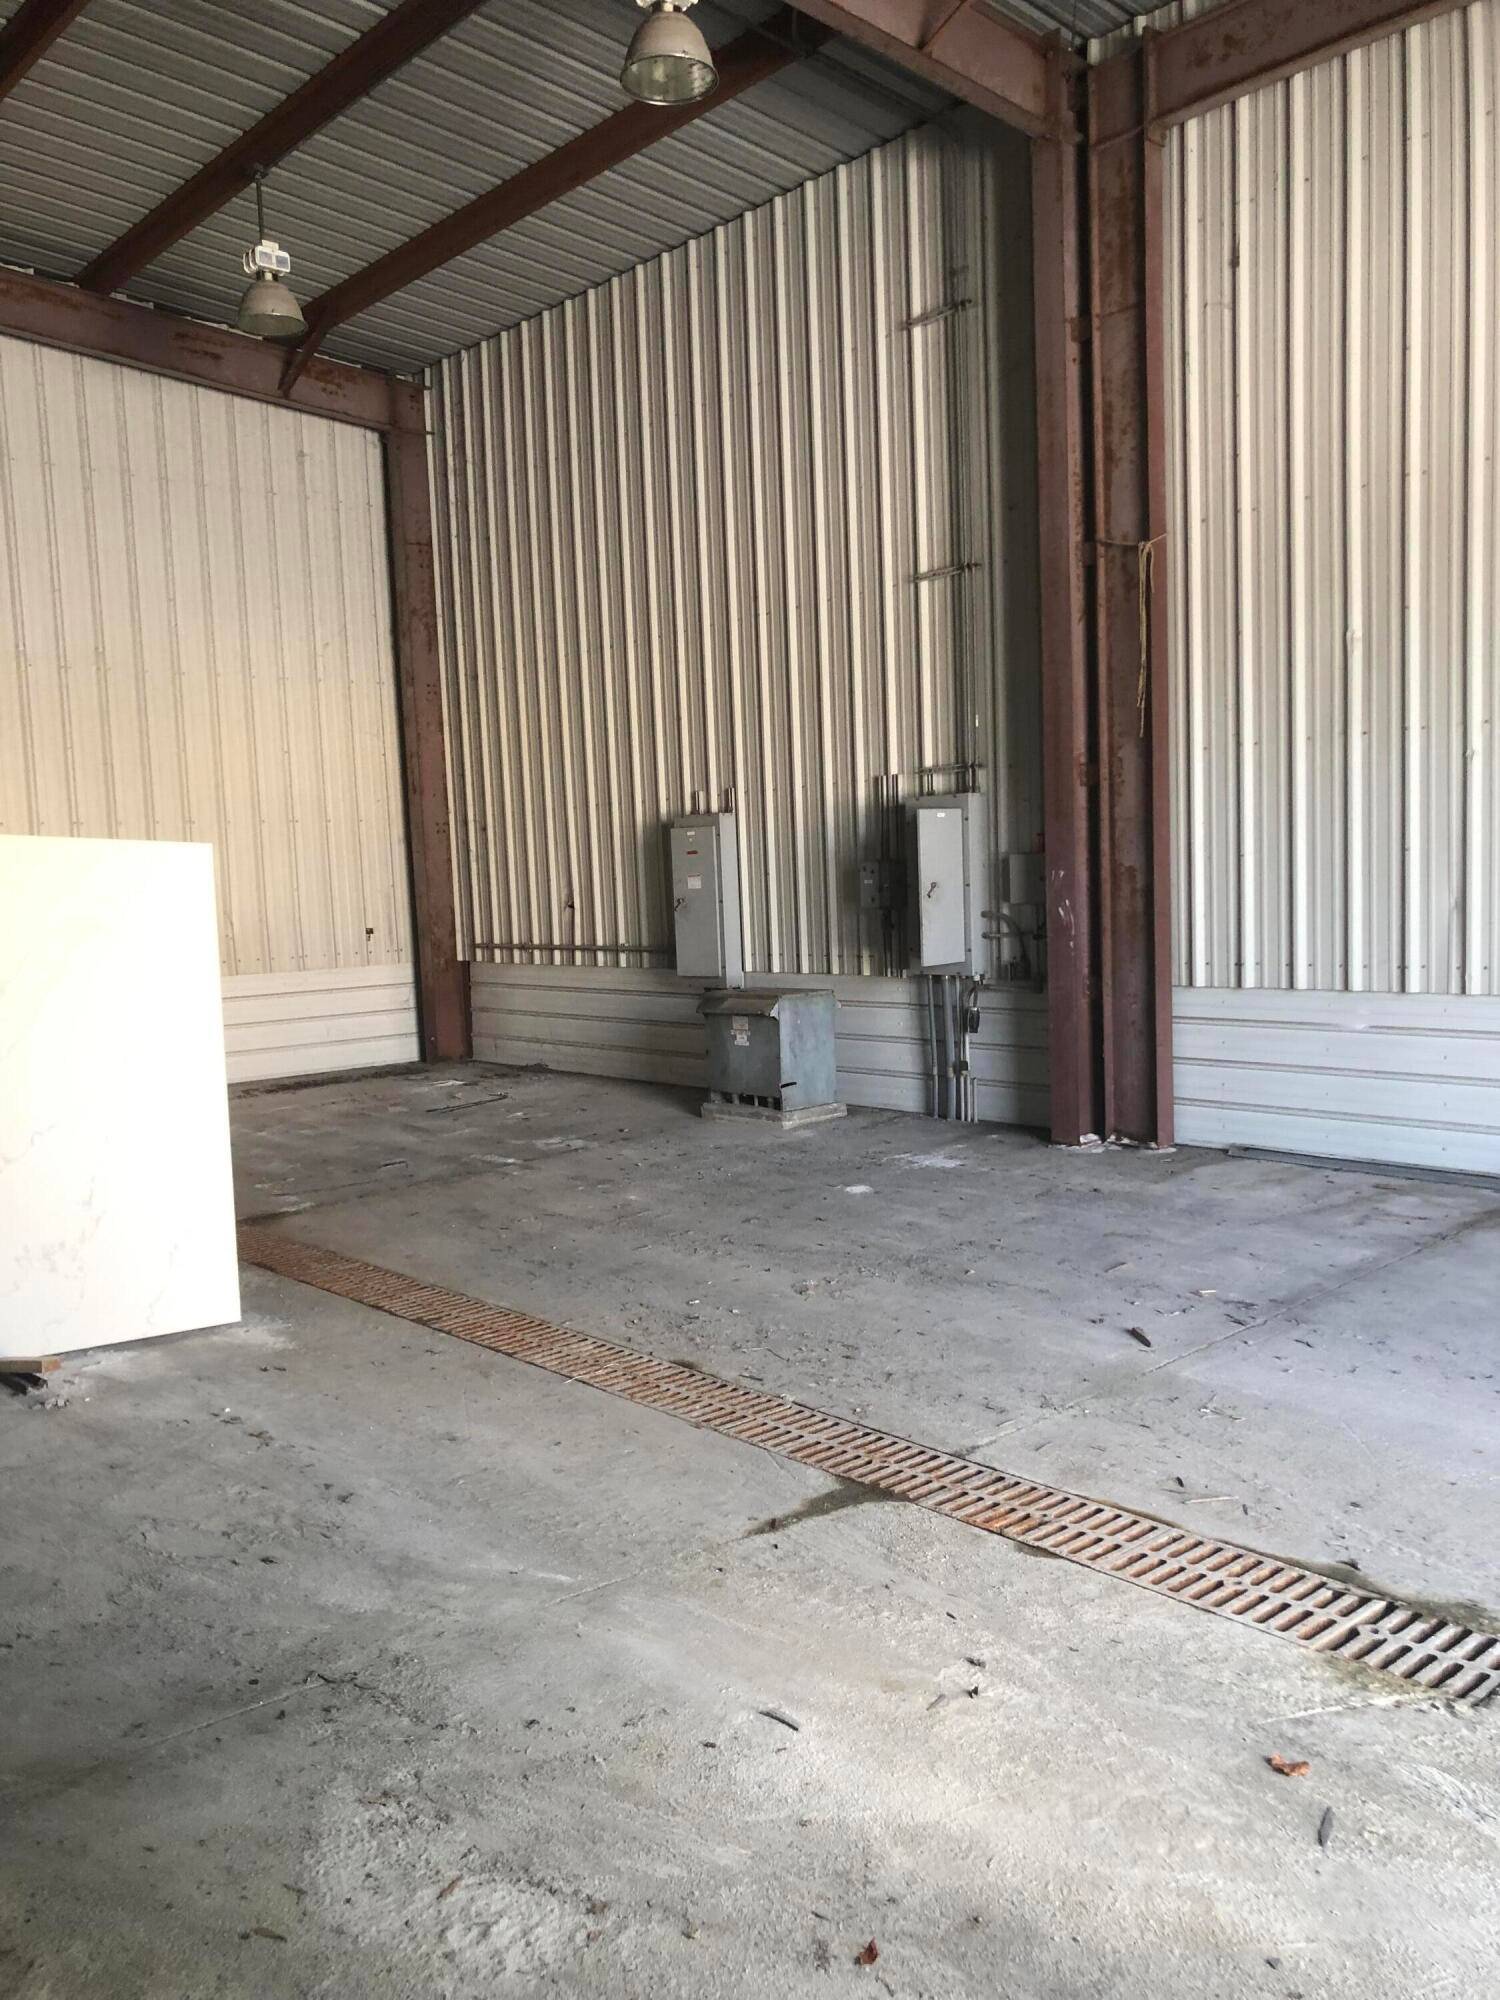 Heavy duty concrete construction 1972 with thick concrete slab floors 7 overhead cranes 5 25 ton Fire sprinklers 240v 480v 3 phase power, transformers, overhead power, gas, and air lines ...